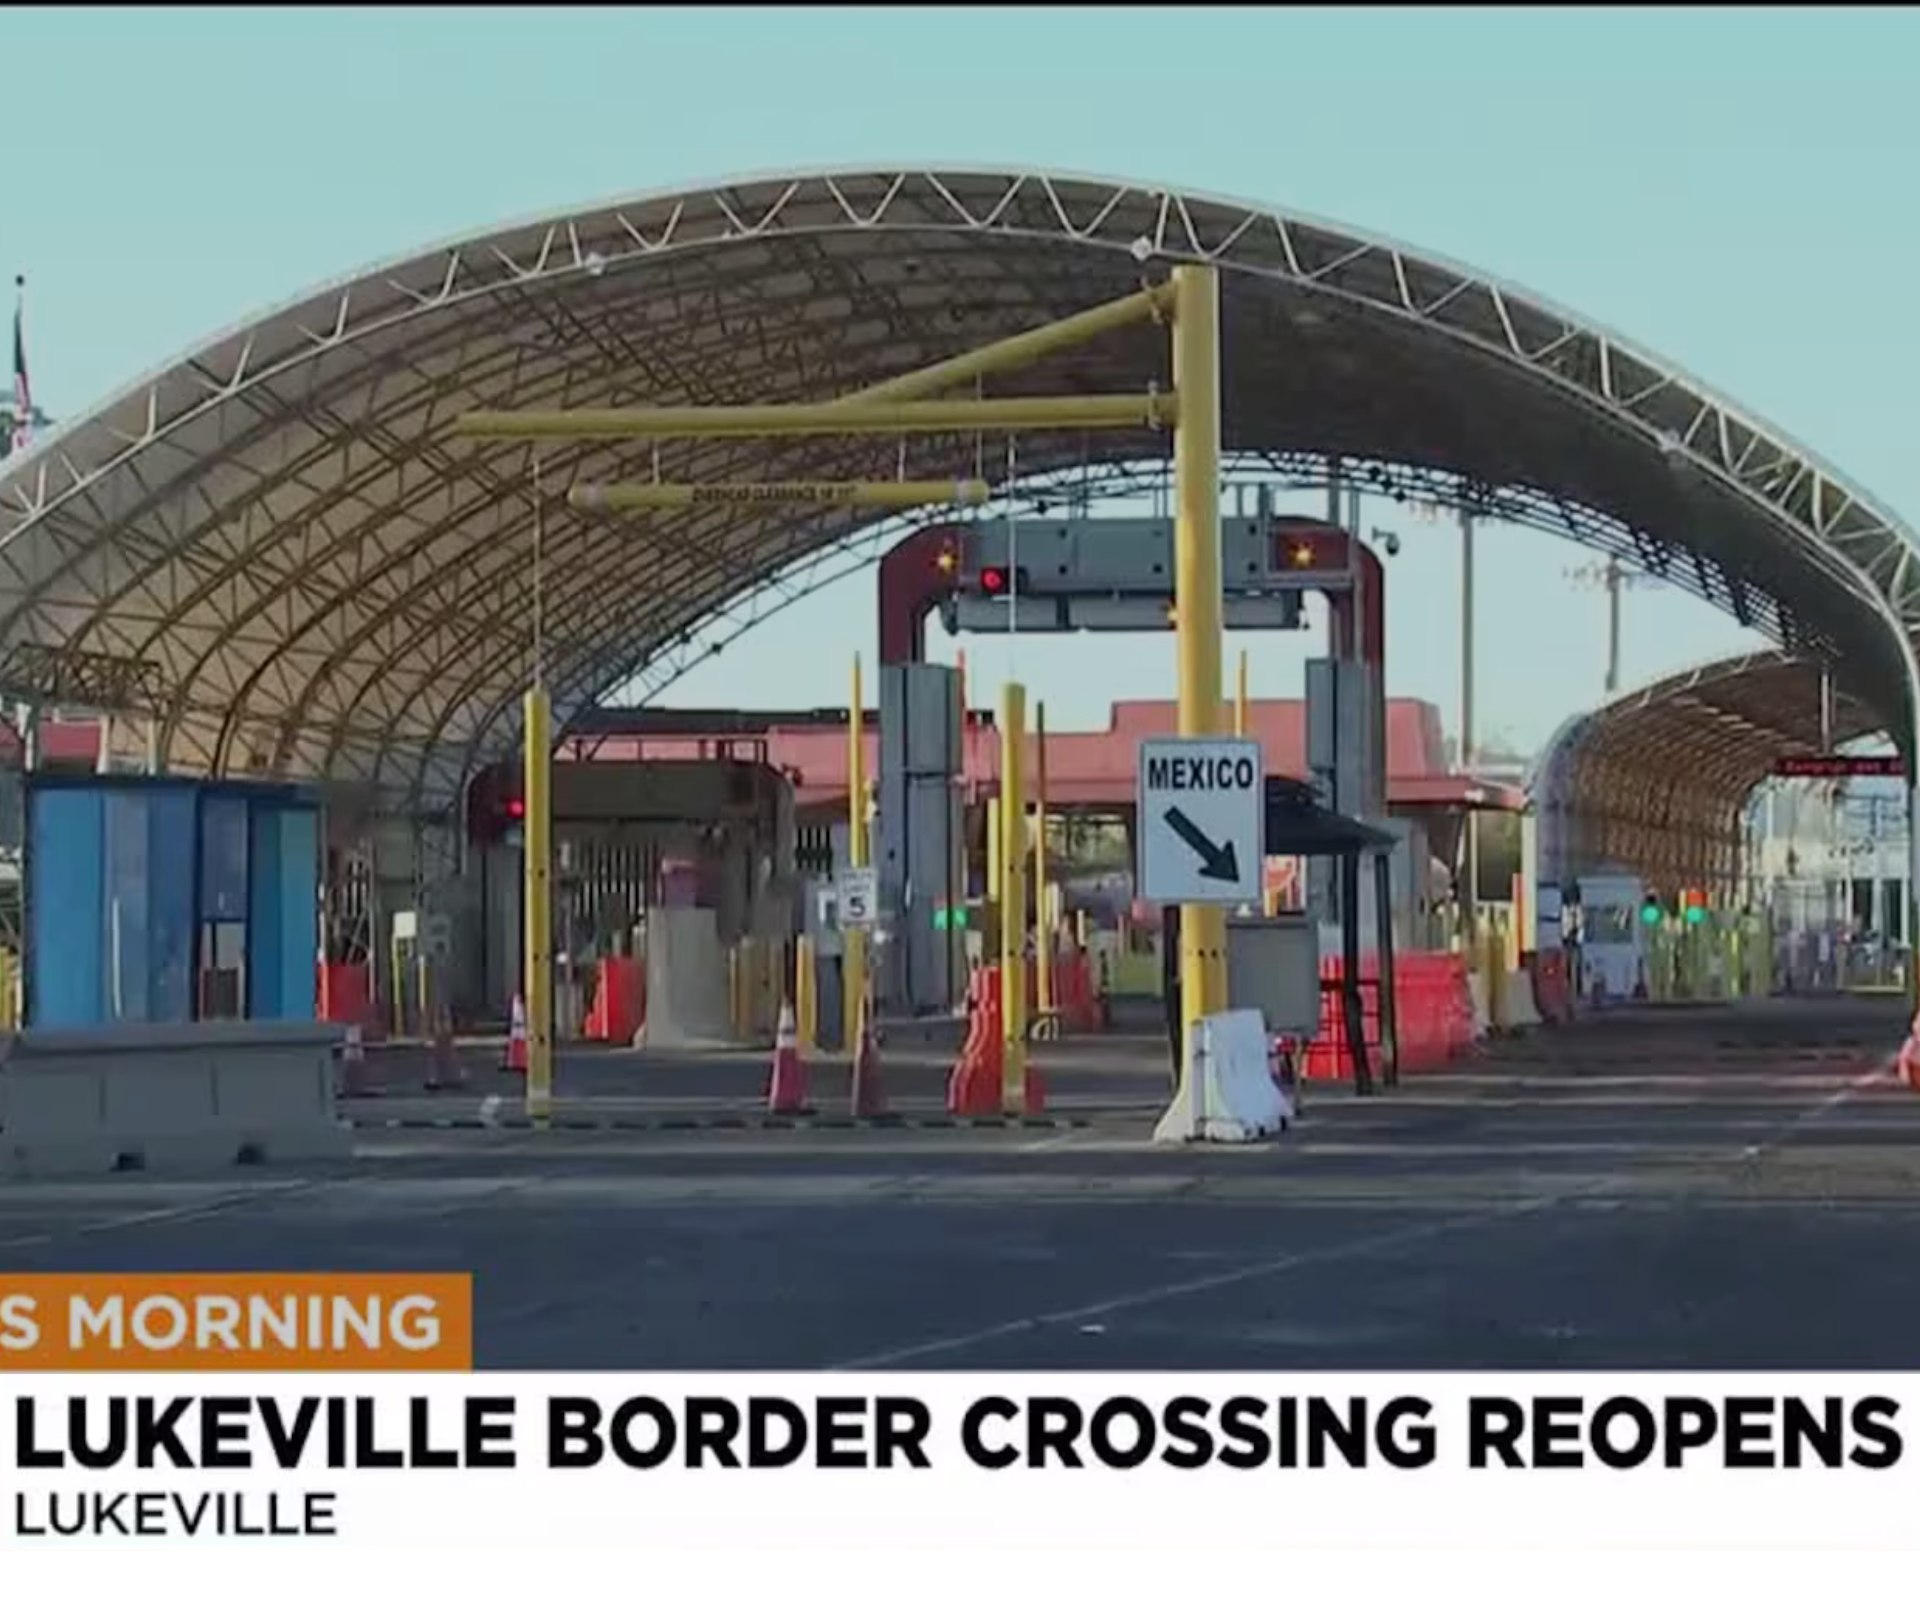 The Lukeville border its open today?